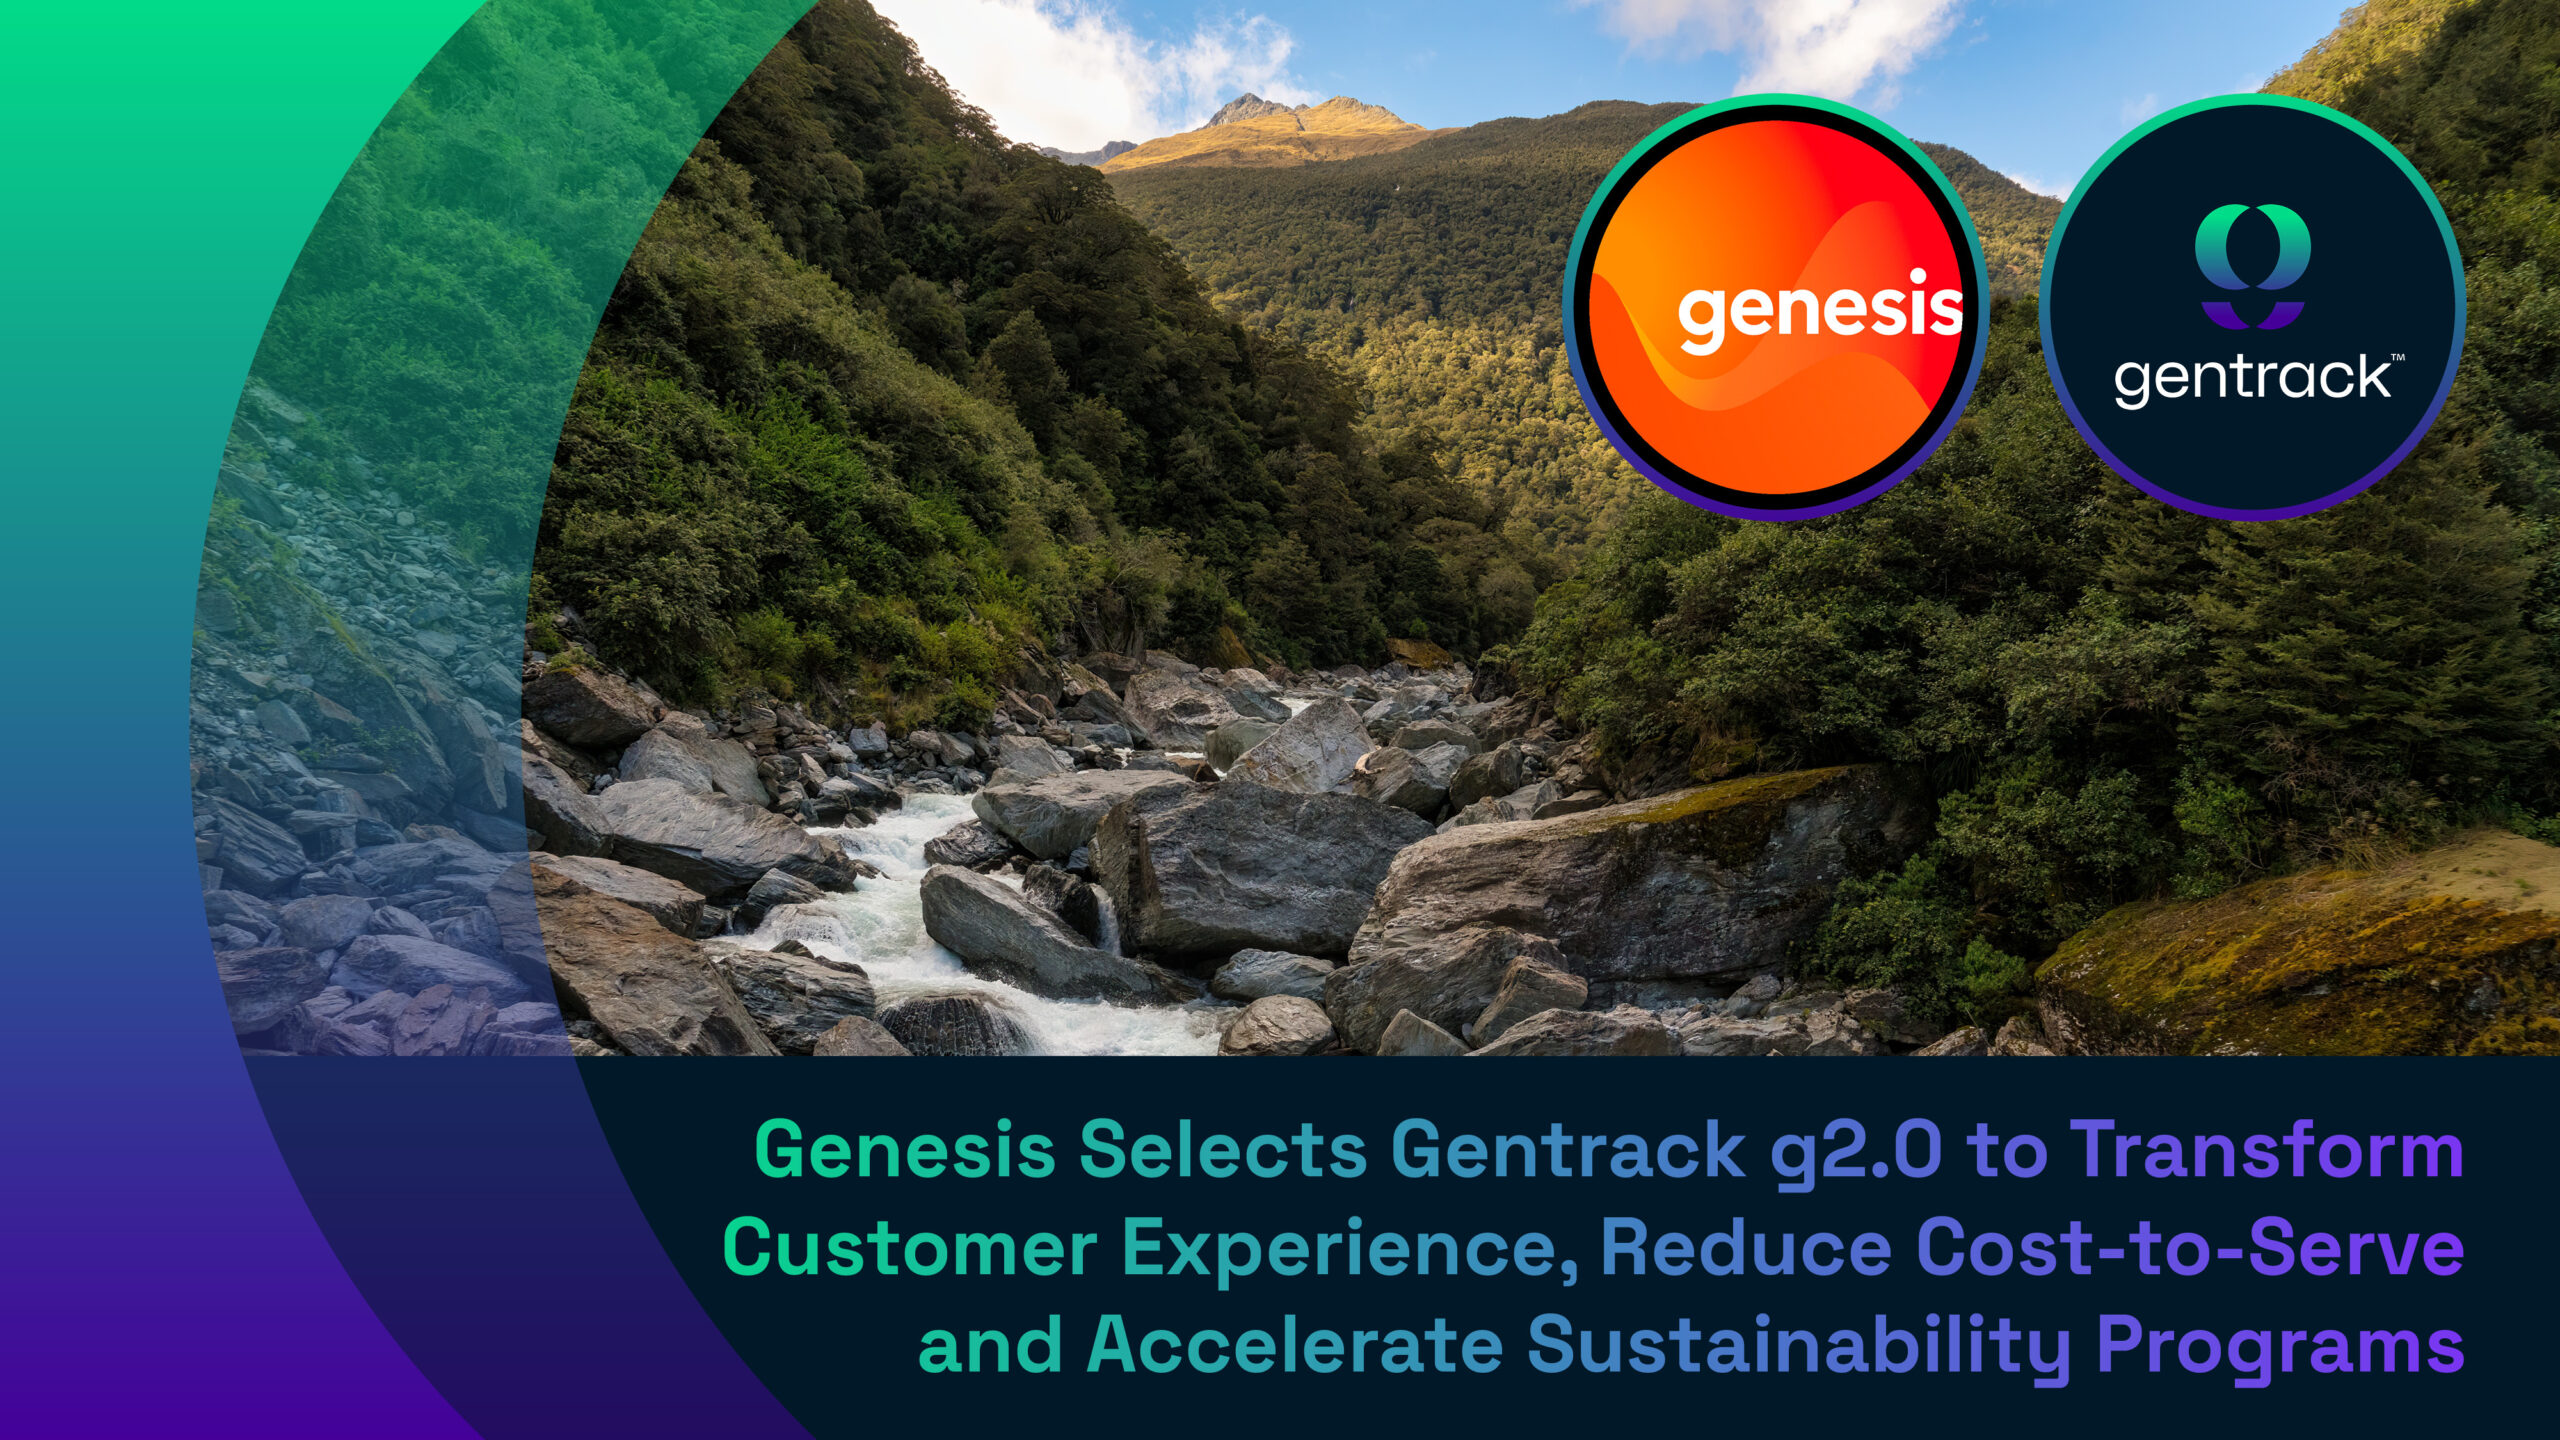 Genesis selects Gentrack g2.0 for transformation